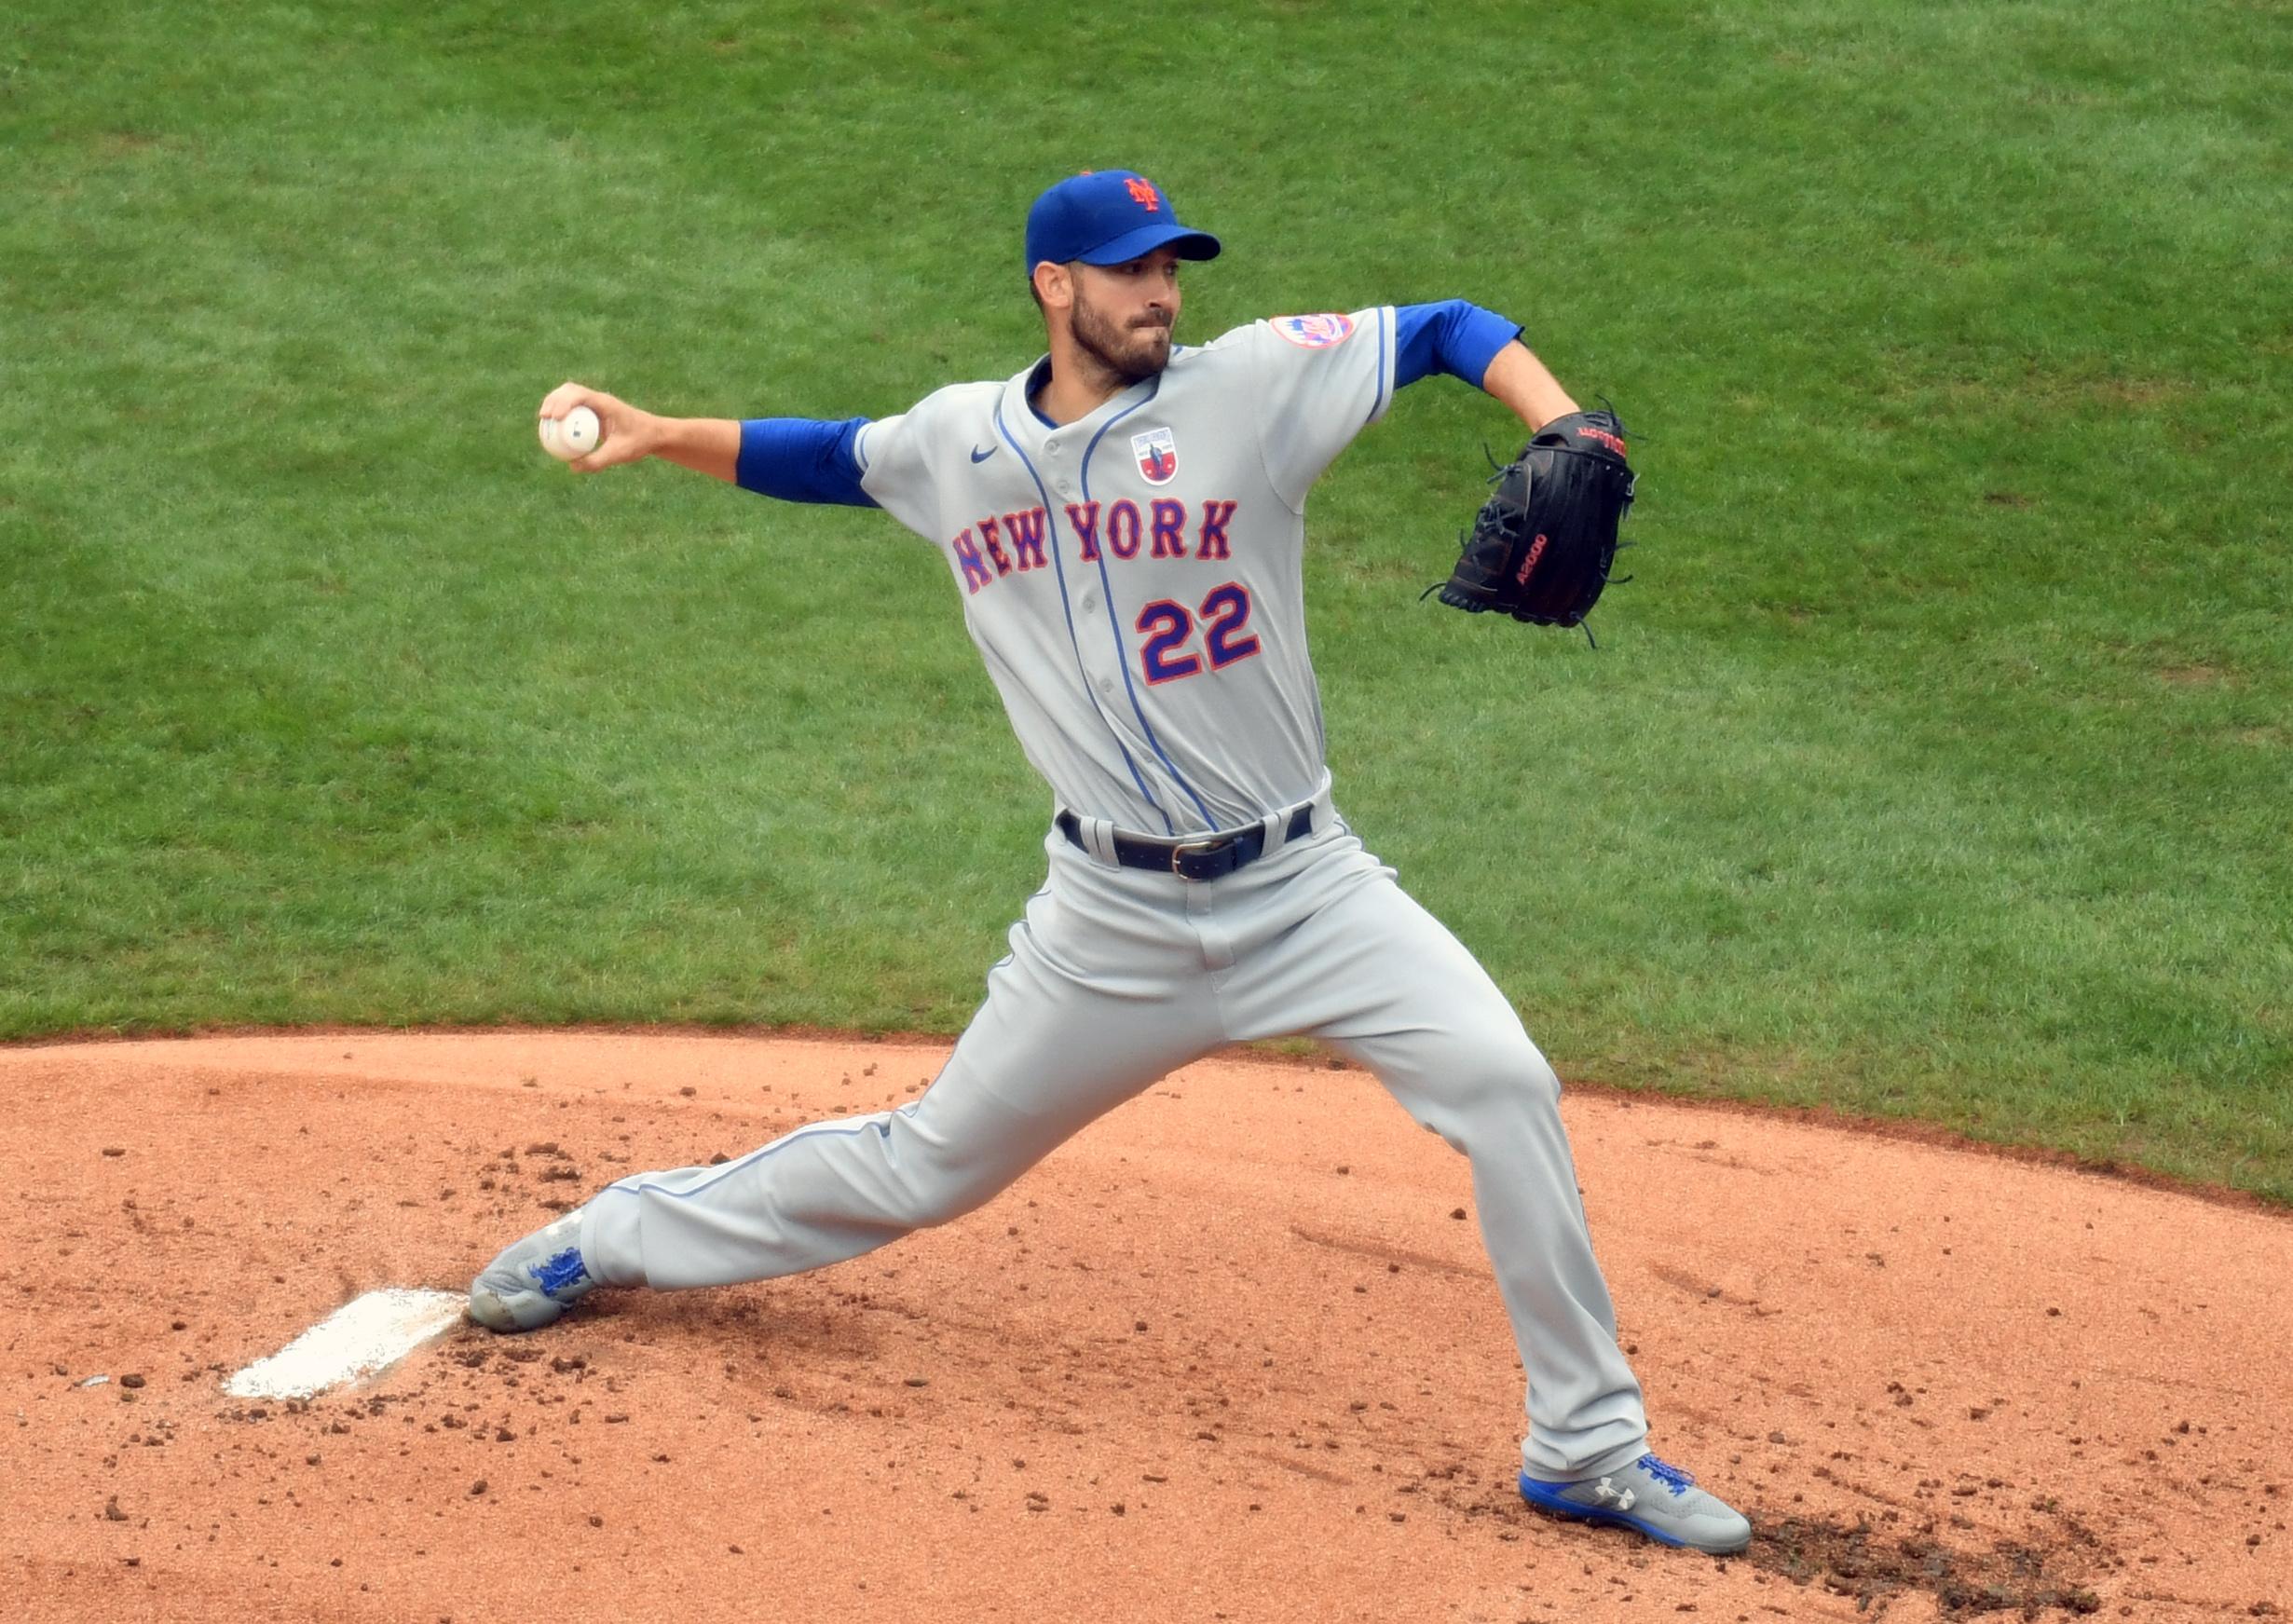 Aug 16, 2020; Philadelphia, Pennsylvania, USA; New York Mets starting pitcher Rick Porcello (22) throws a pitch during the first inning against the Philadelphia Phillies at Citizens Bank Park. Mandatory Credit: Eric Hartline-USA TODAY Sports / Eric Hartline-USA TODAY Sports